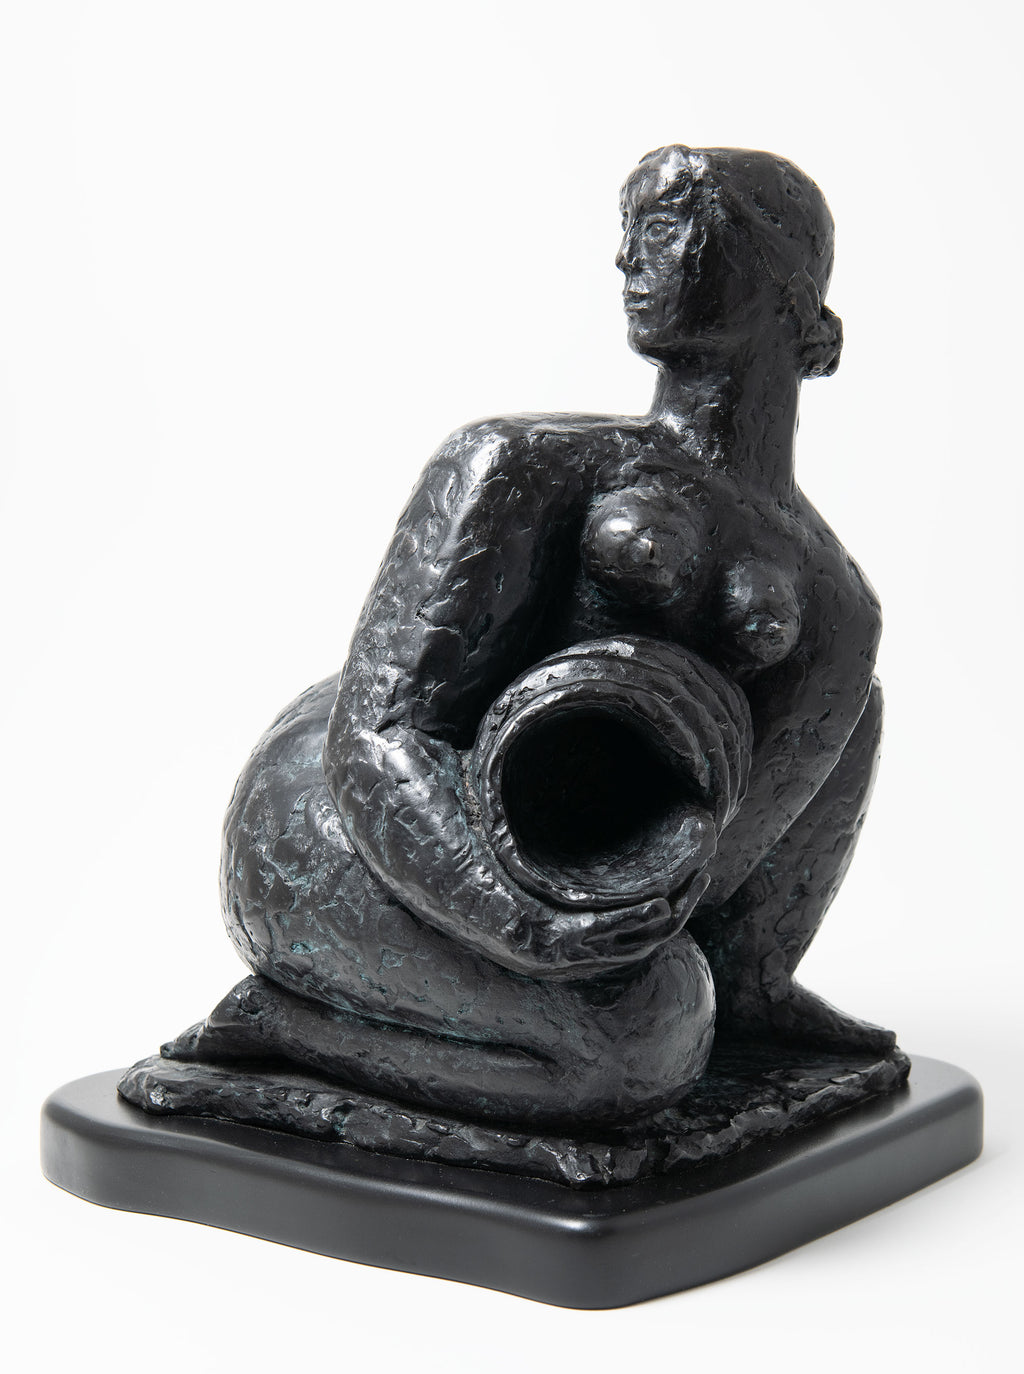 Squatting Female Figure with Pitcher